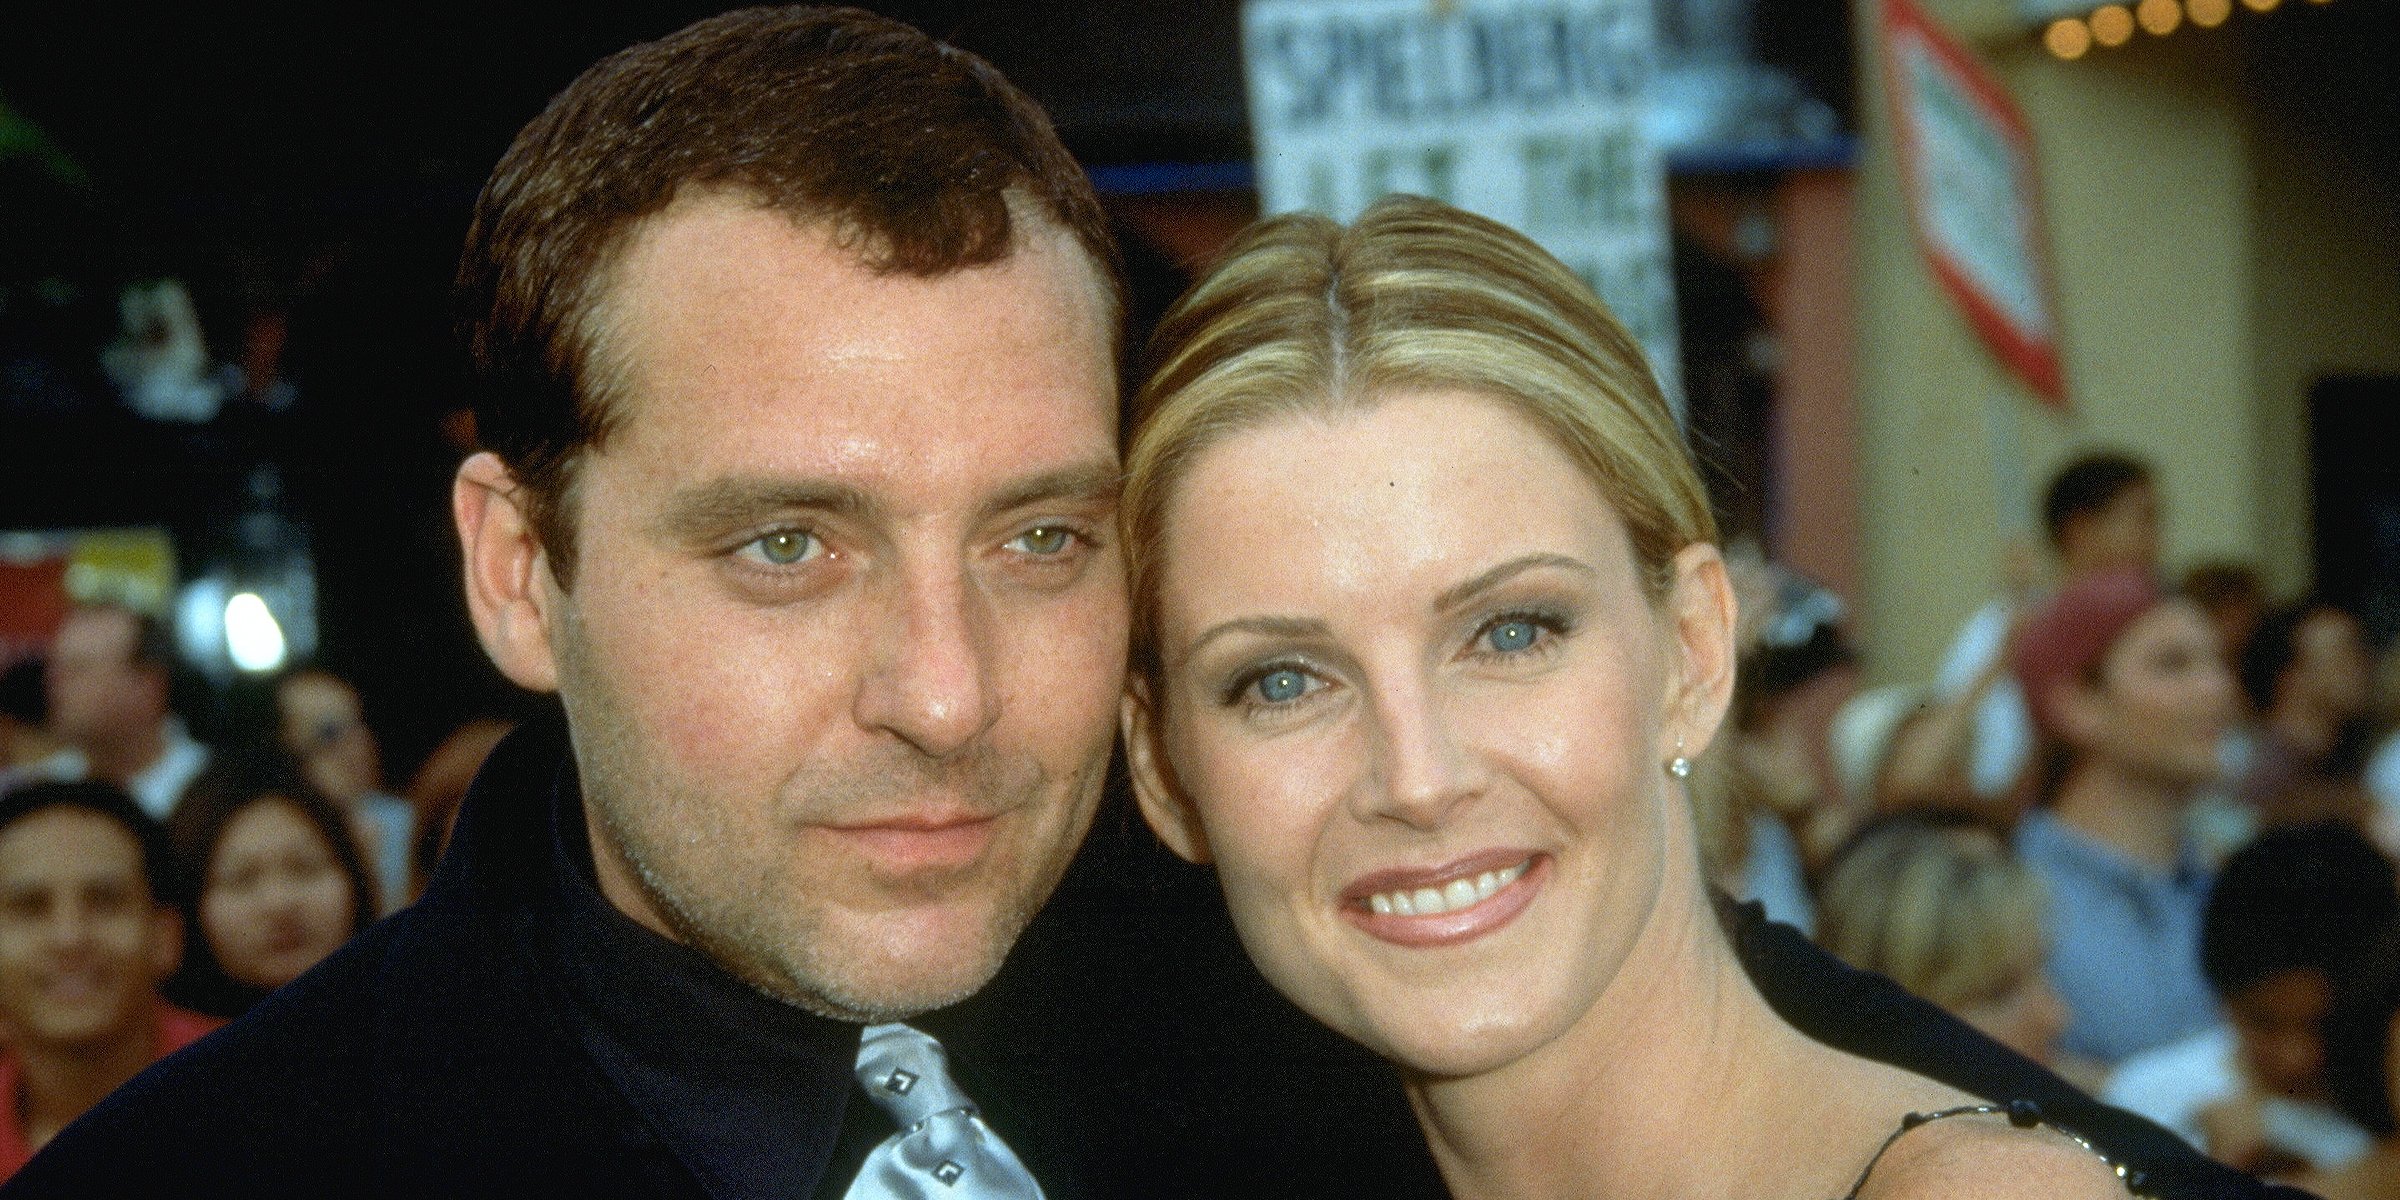 Tom Sizemore and Maeve Quinlan | Source: Getty Images